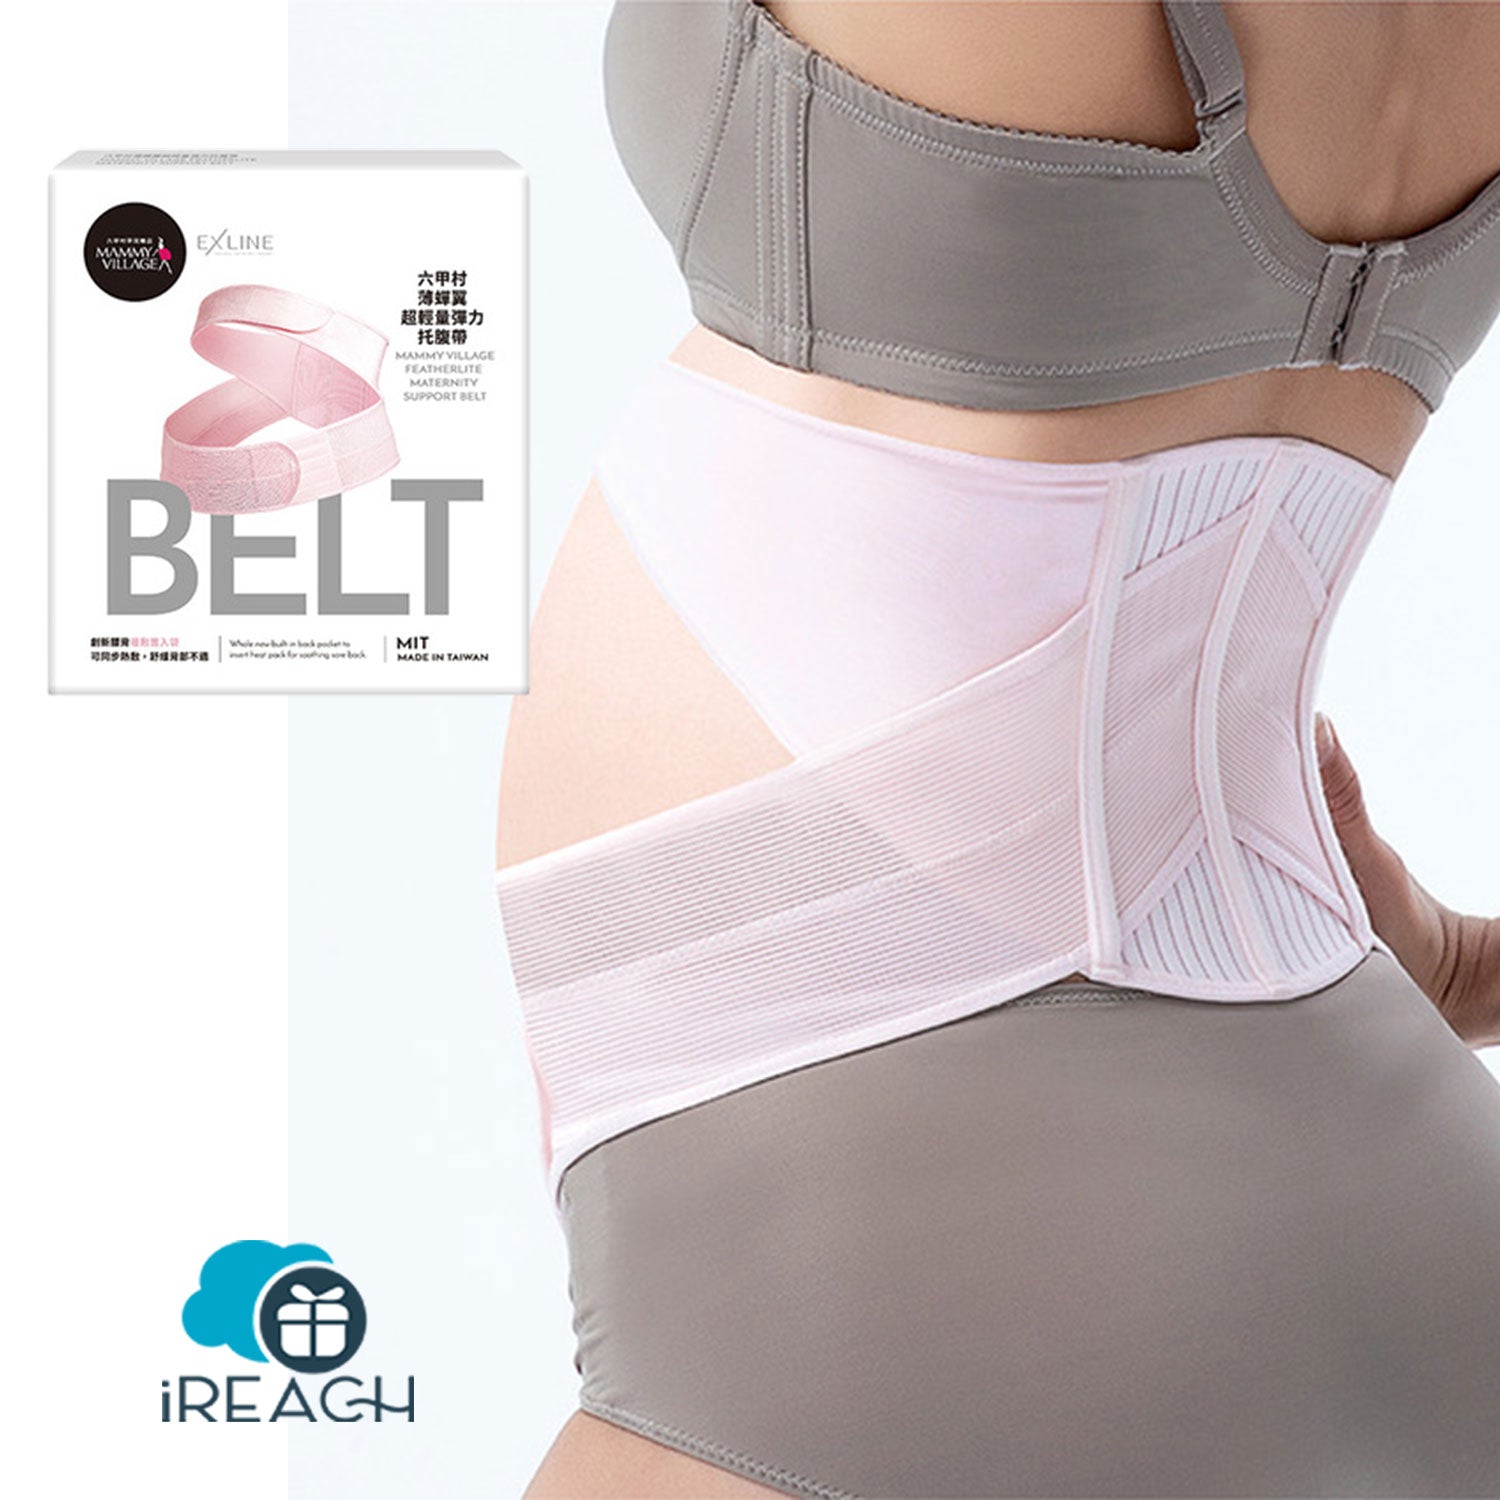 Mammy Village Thin Cicada Wing Ultra-Light Elastic Maternity Support Belt L Pink [Authorized Goods]